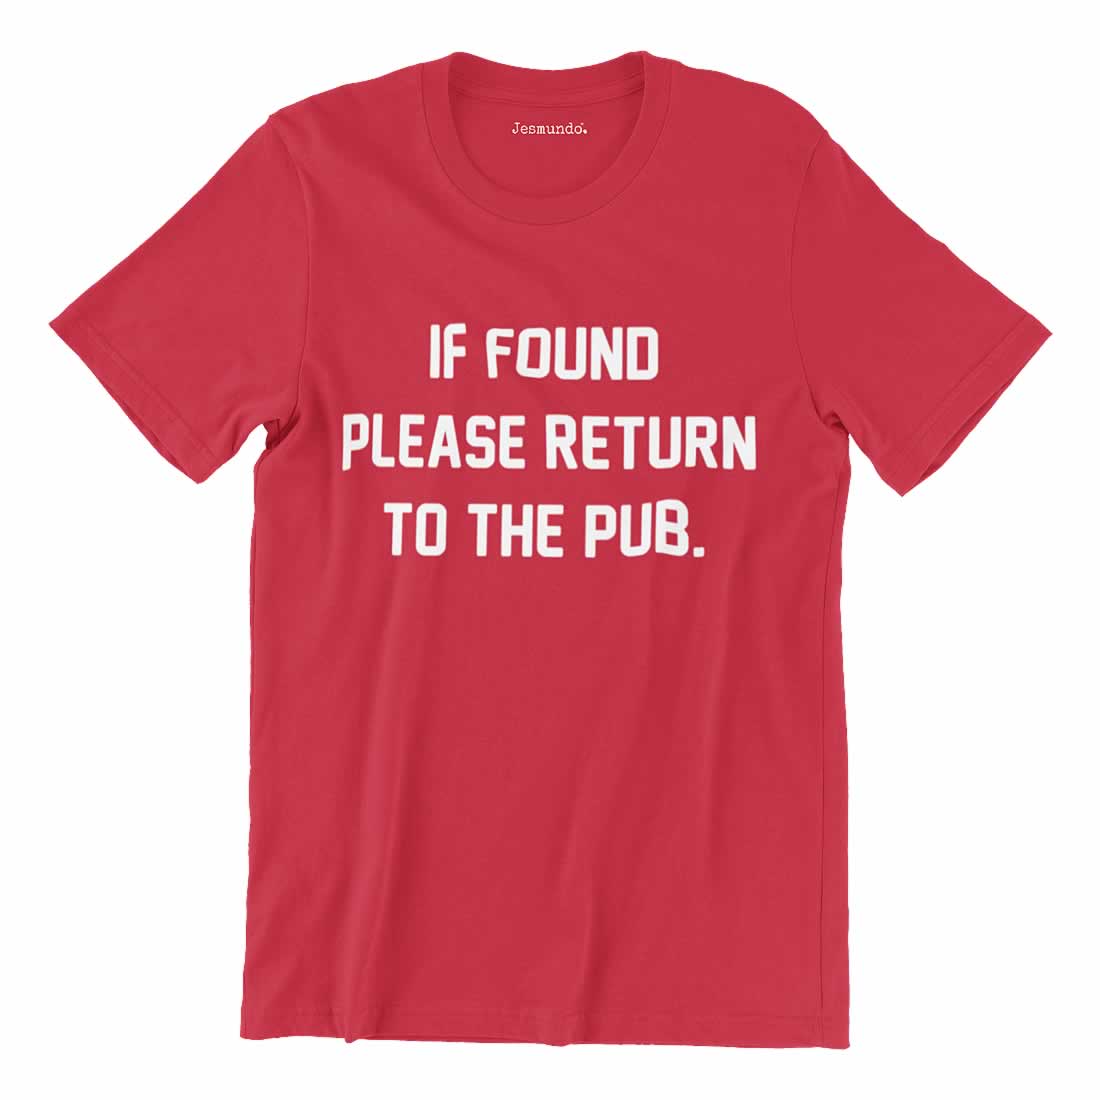 If found please return to the pub t shirt